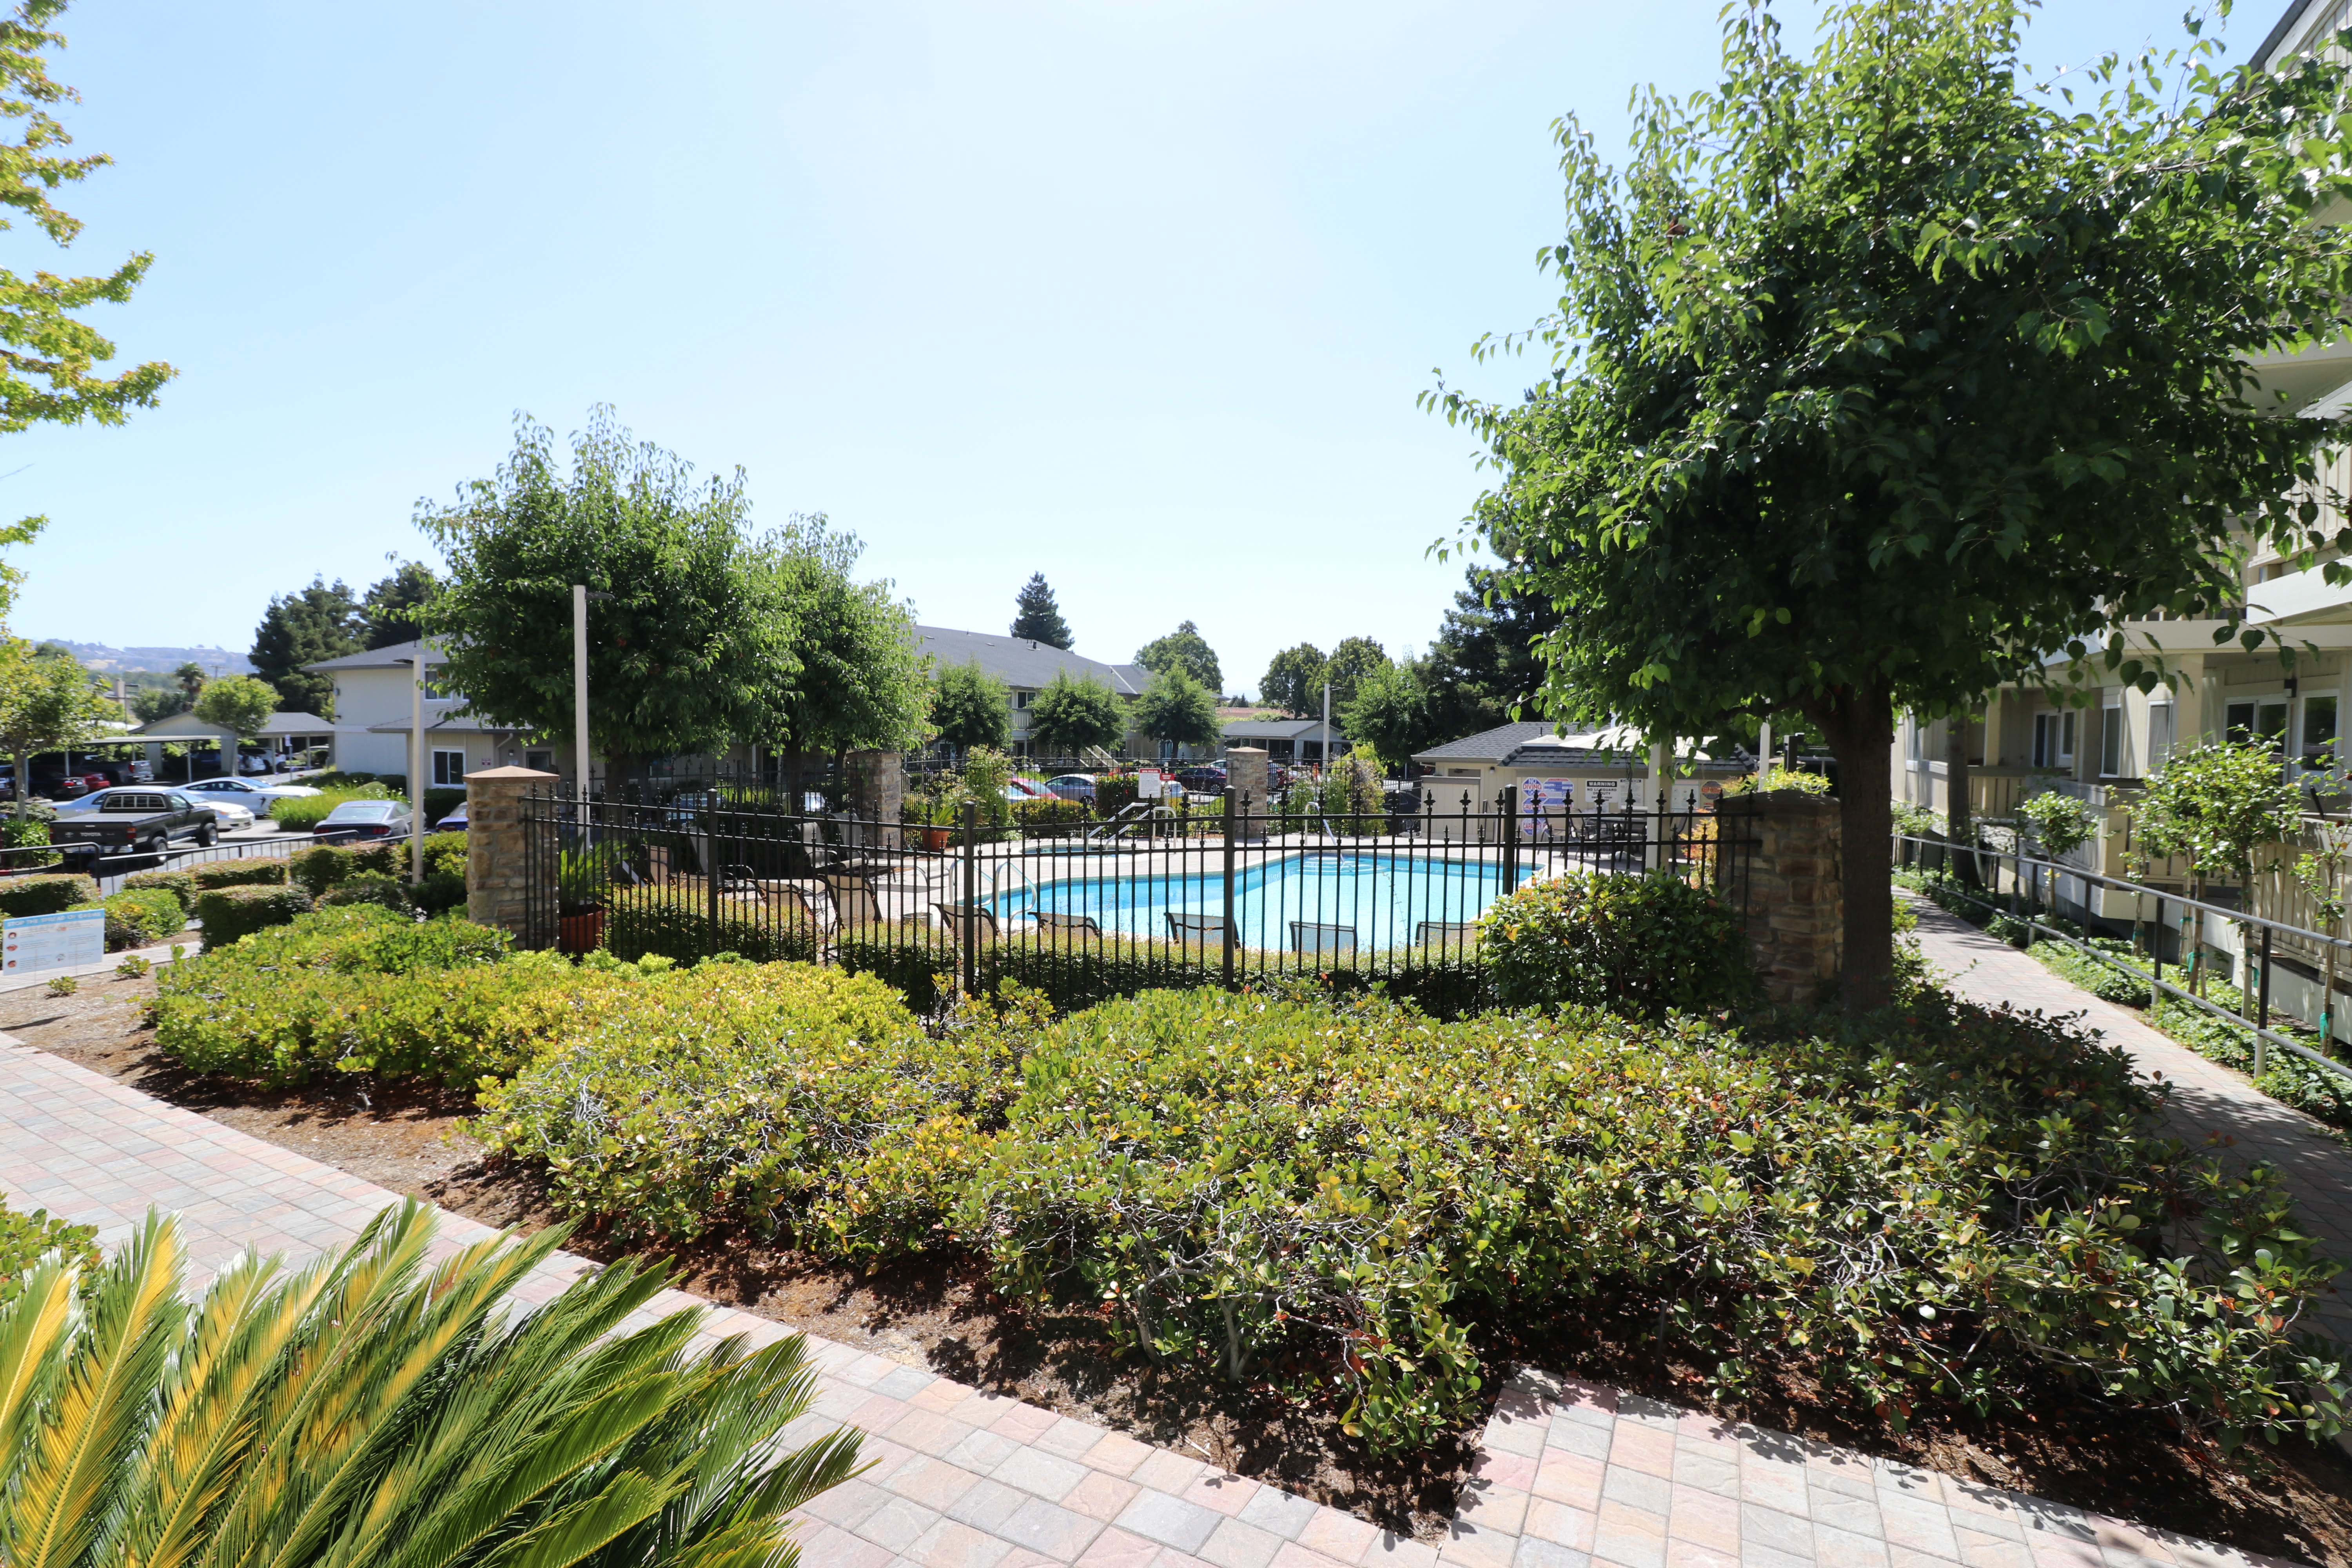 Landscaping outside of the pool at Summerhill Terrace Apartment Homes in San Leandro, California